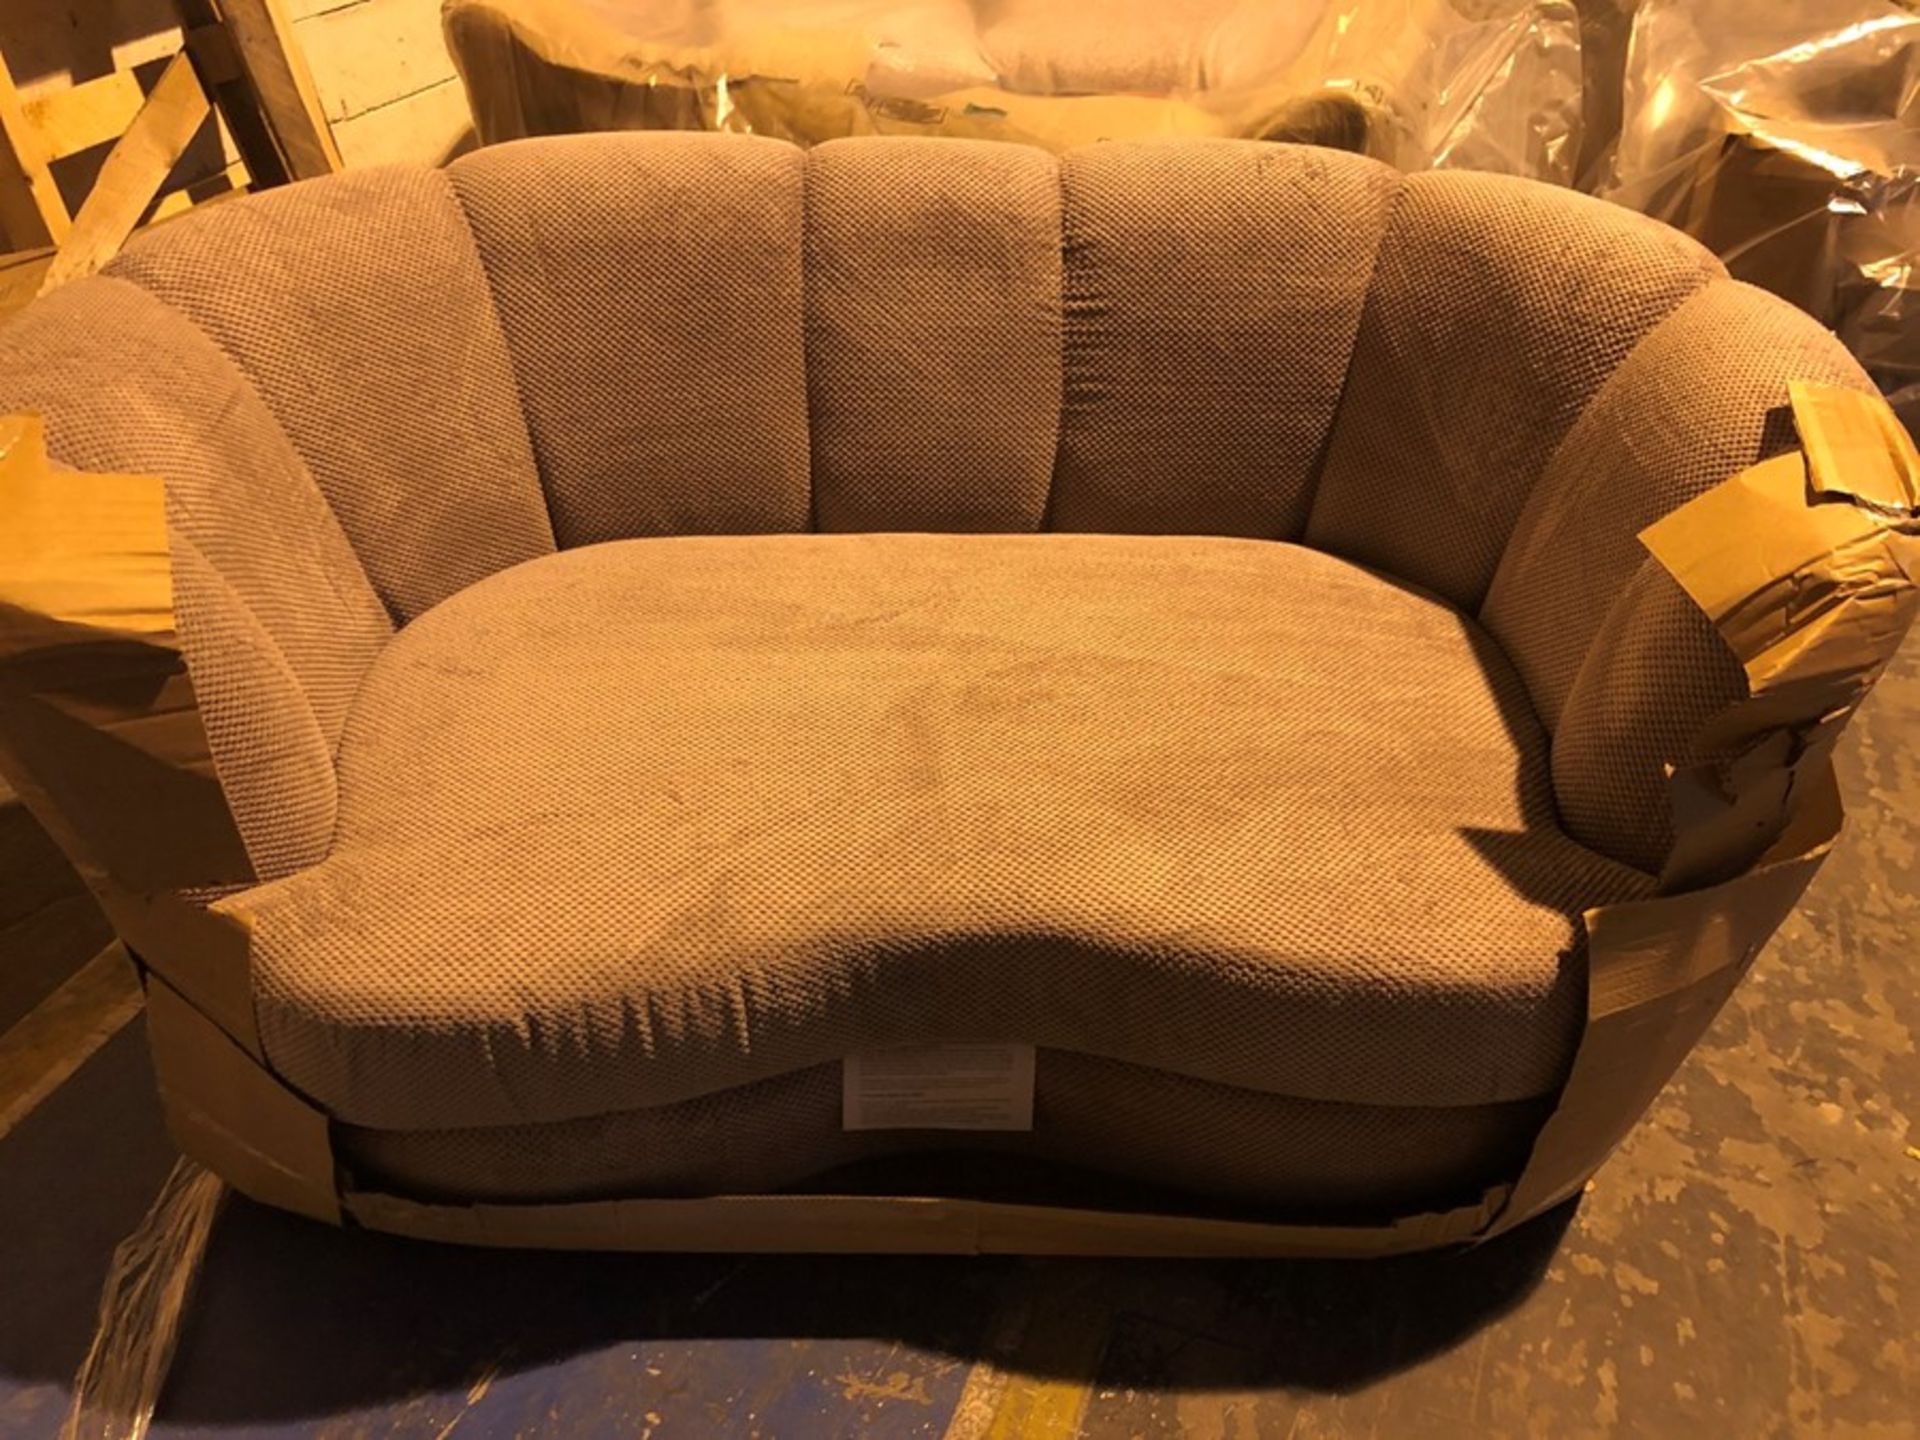 1 / BRAND NEW BAGGED FABB SOFA JELLY 2 SEATER IN BRICK TAUPE (VIEWING HIGHLY RECOMMENDED)